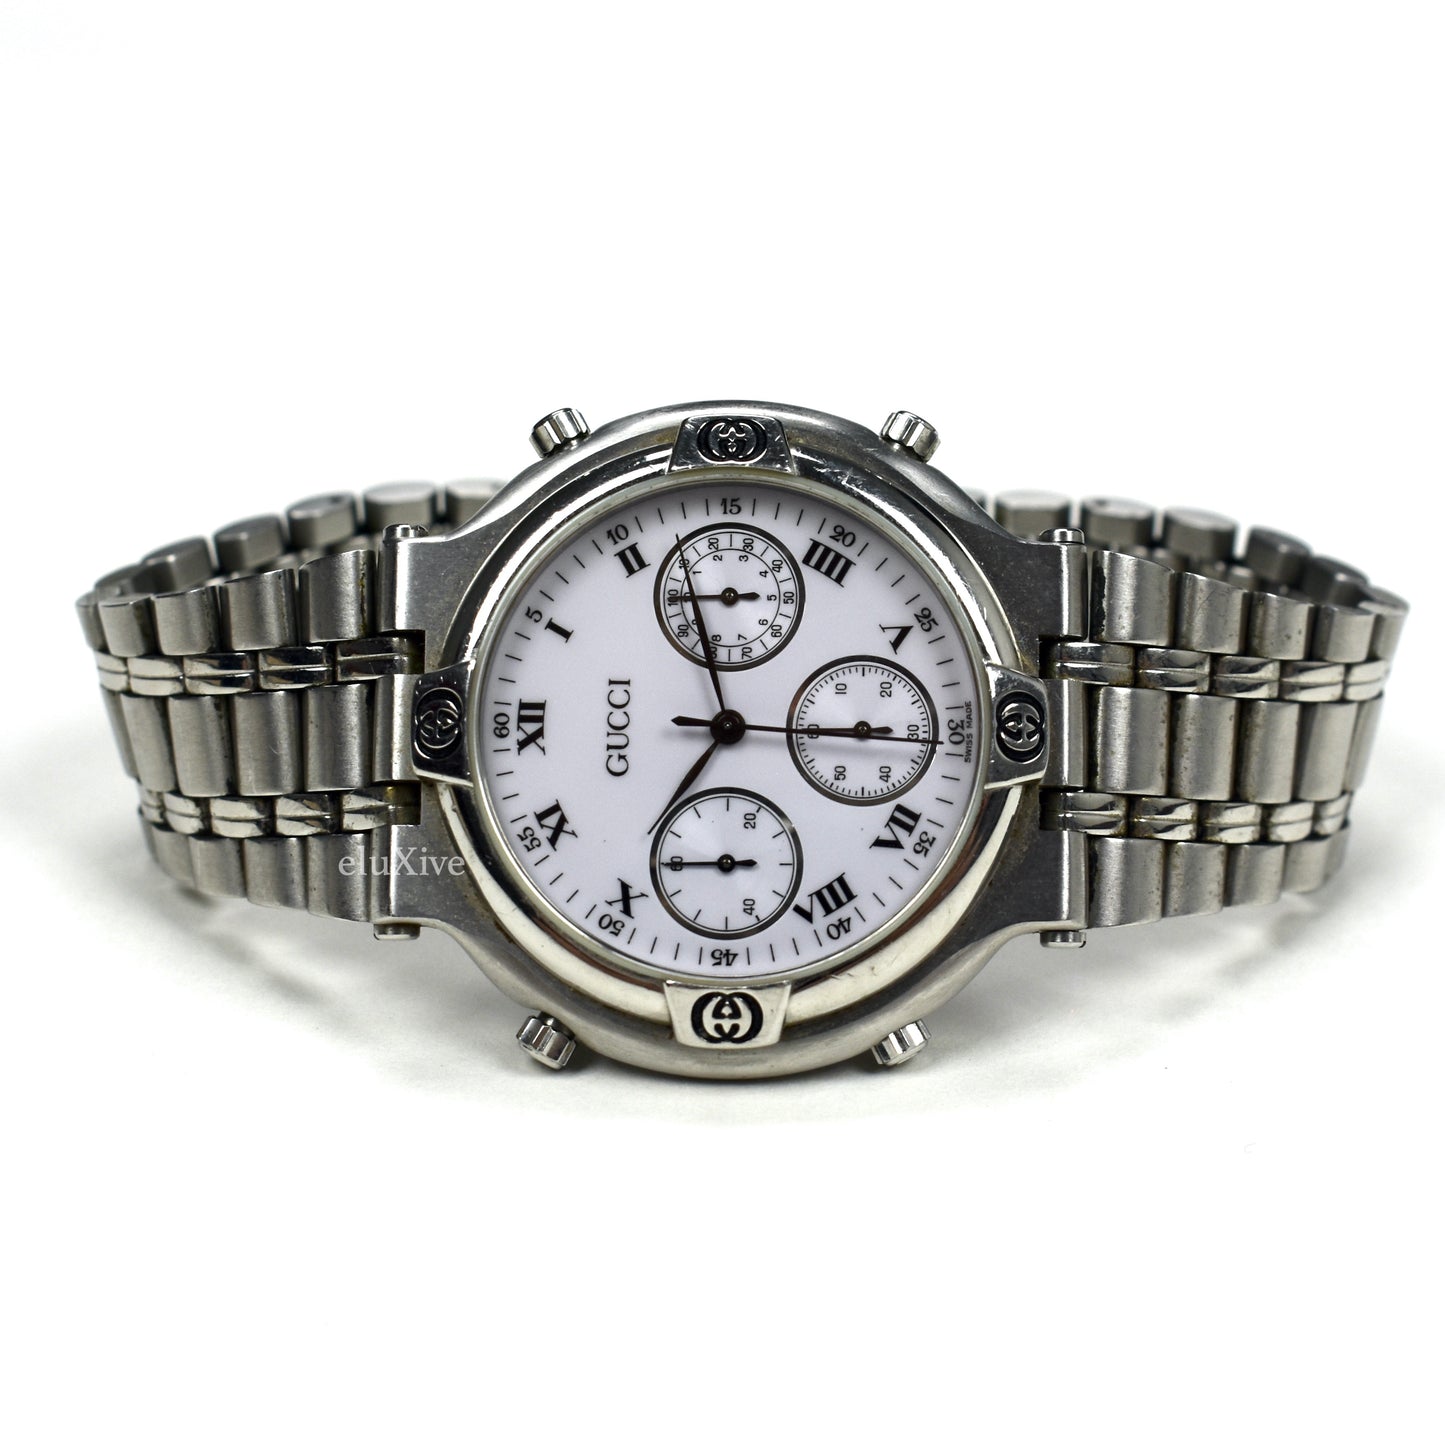 Gucci - 9300M Steel White Dial Chronograph Watch